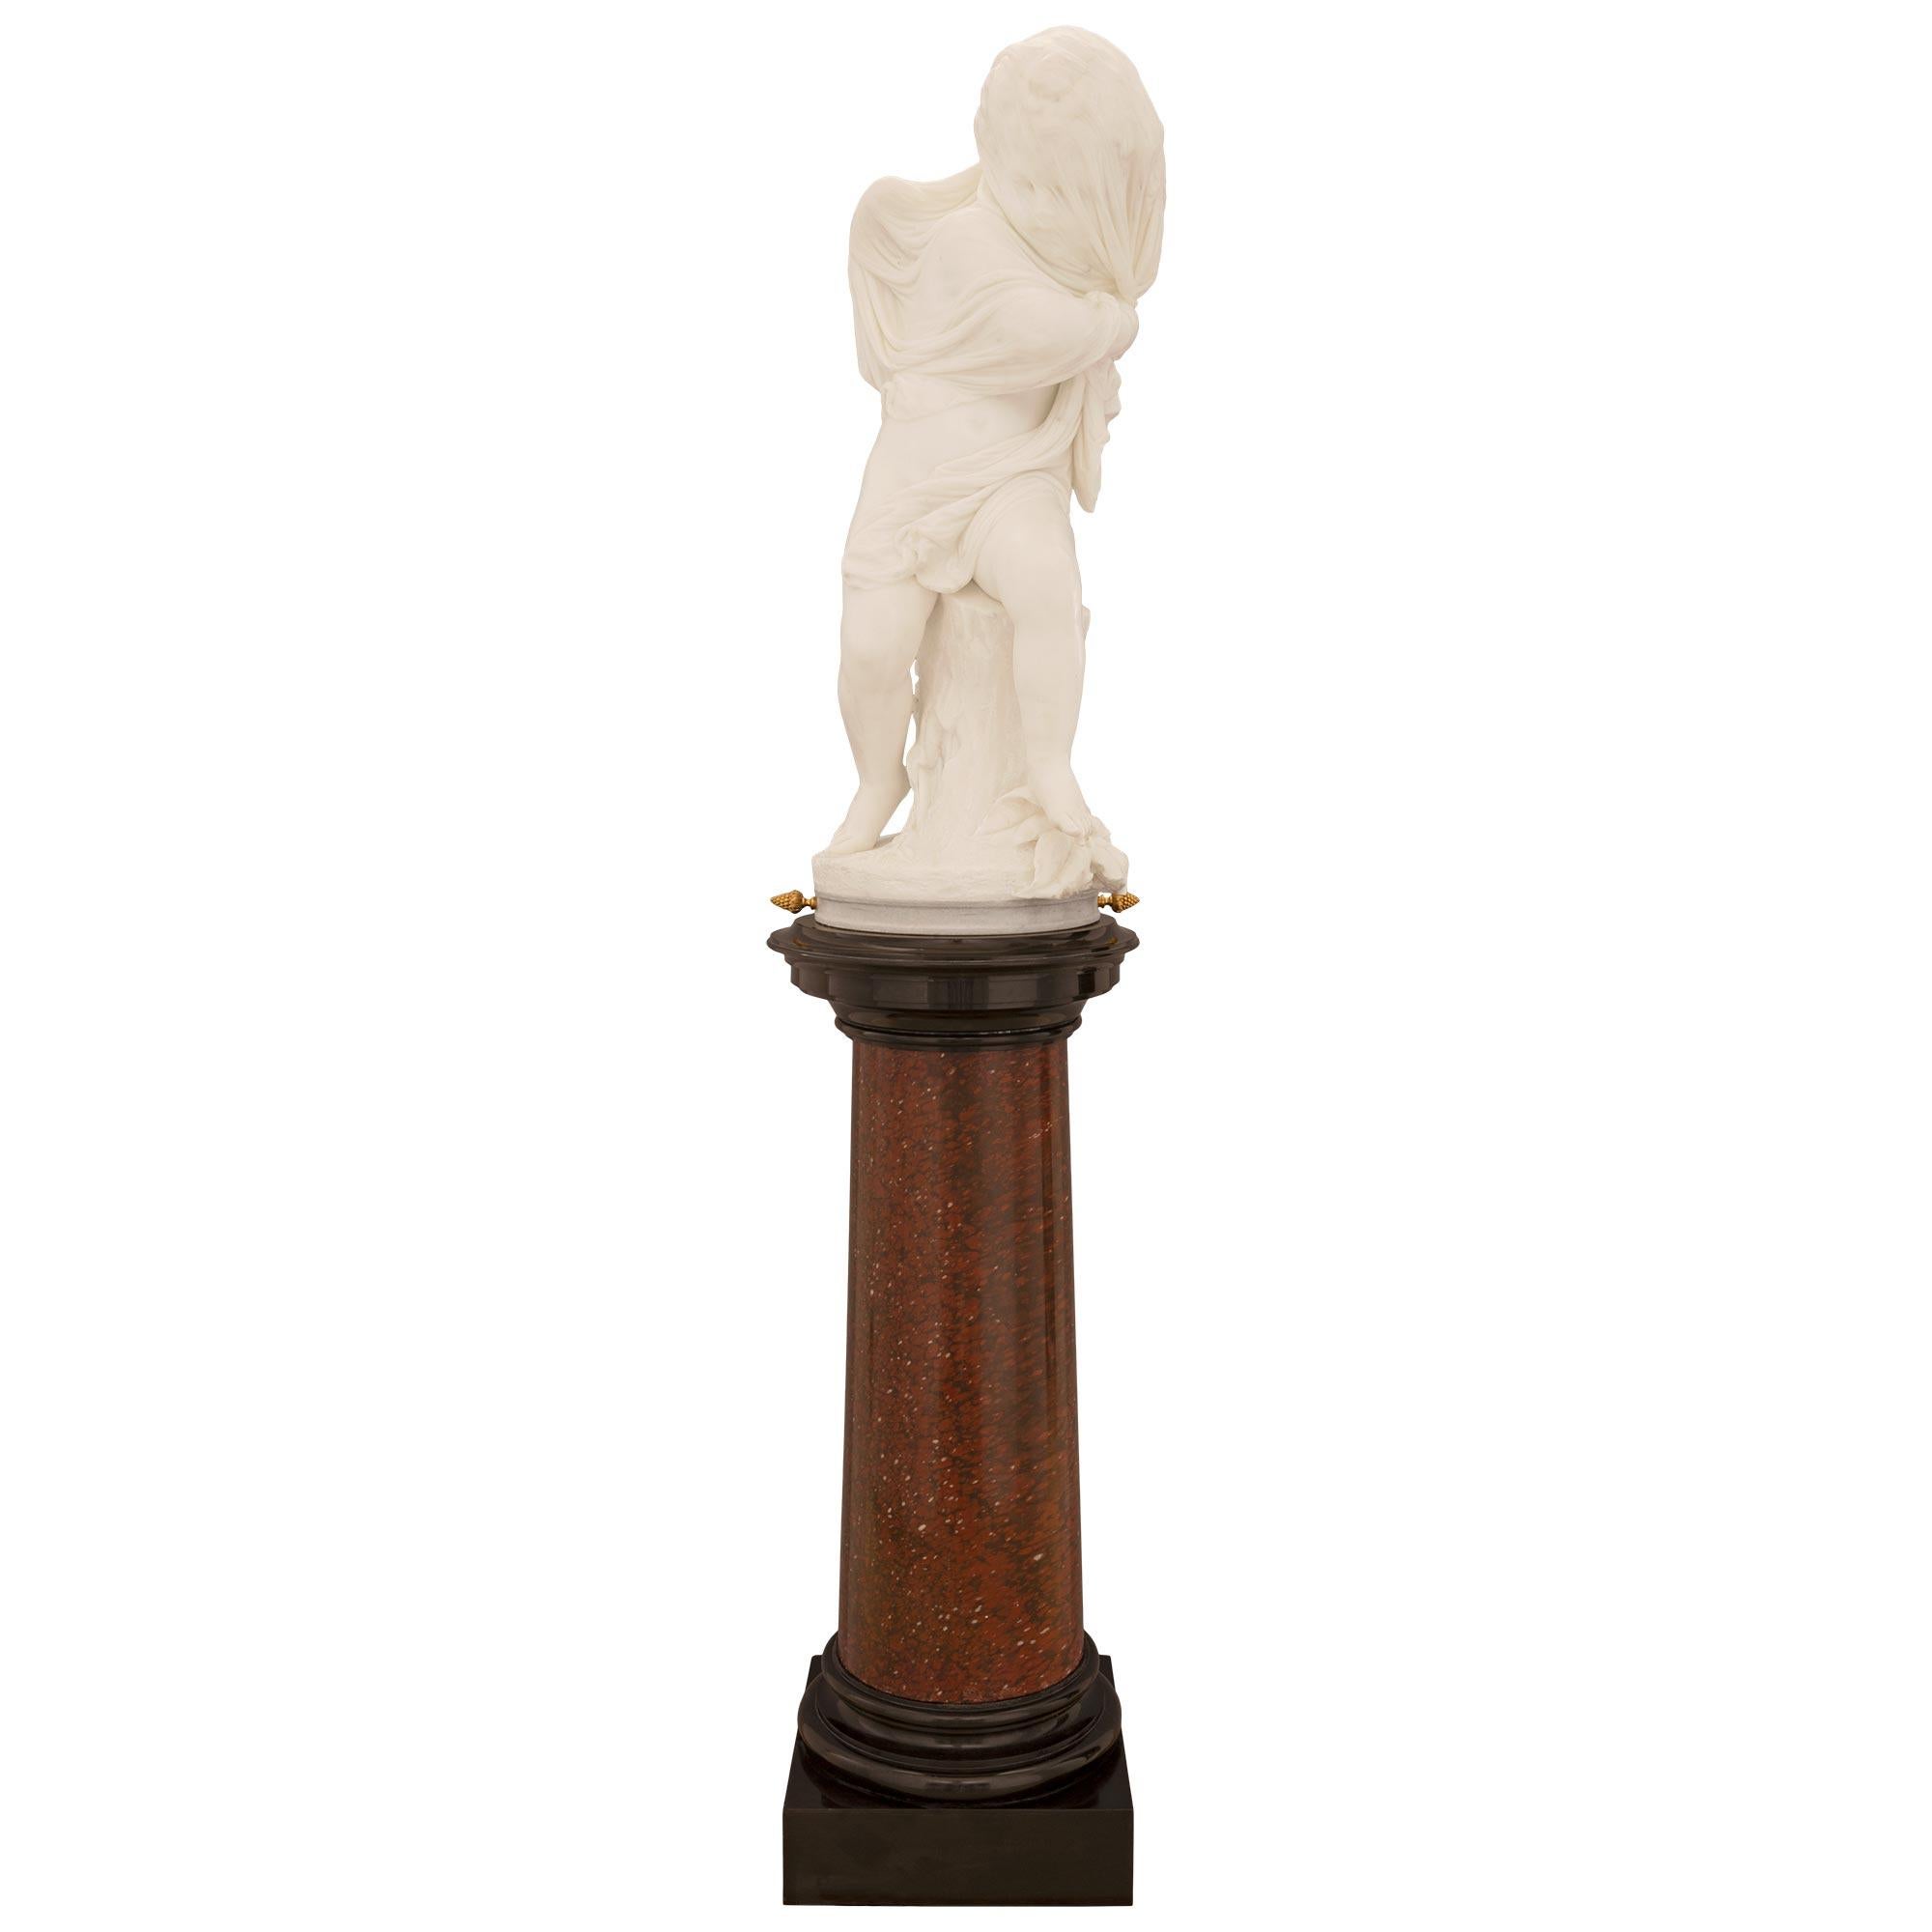 An exquisite and extremely high quality Italian 19th century white Carrara marble statue on its original Rouge Griotte and black Belgian marble pedestal named 